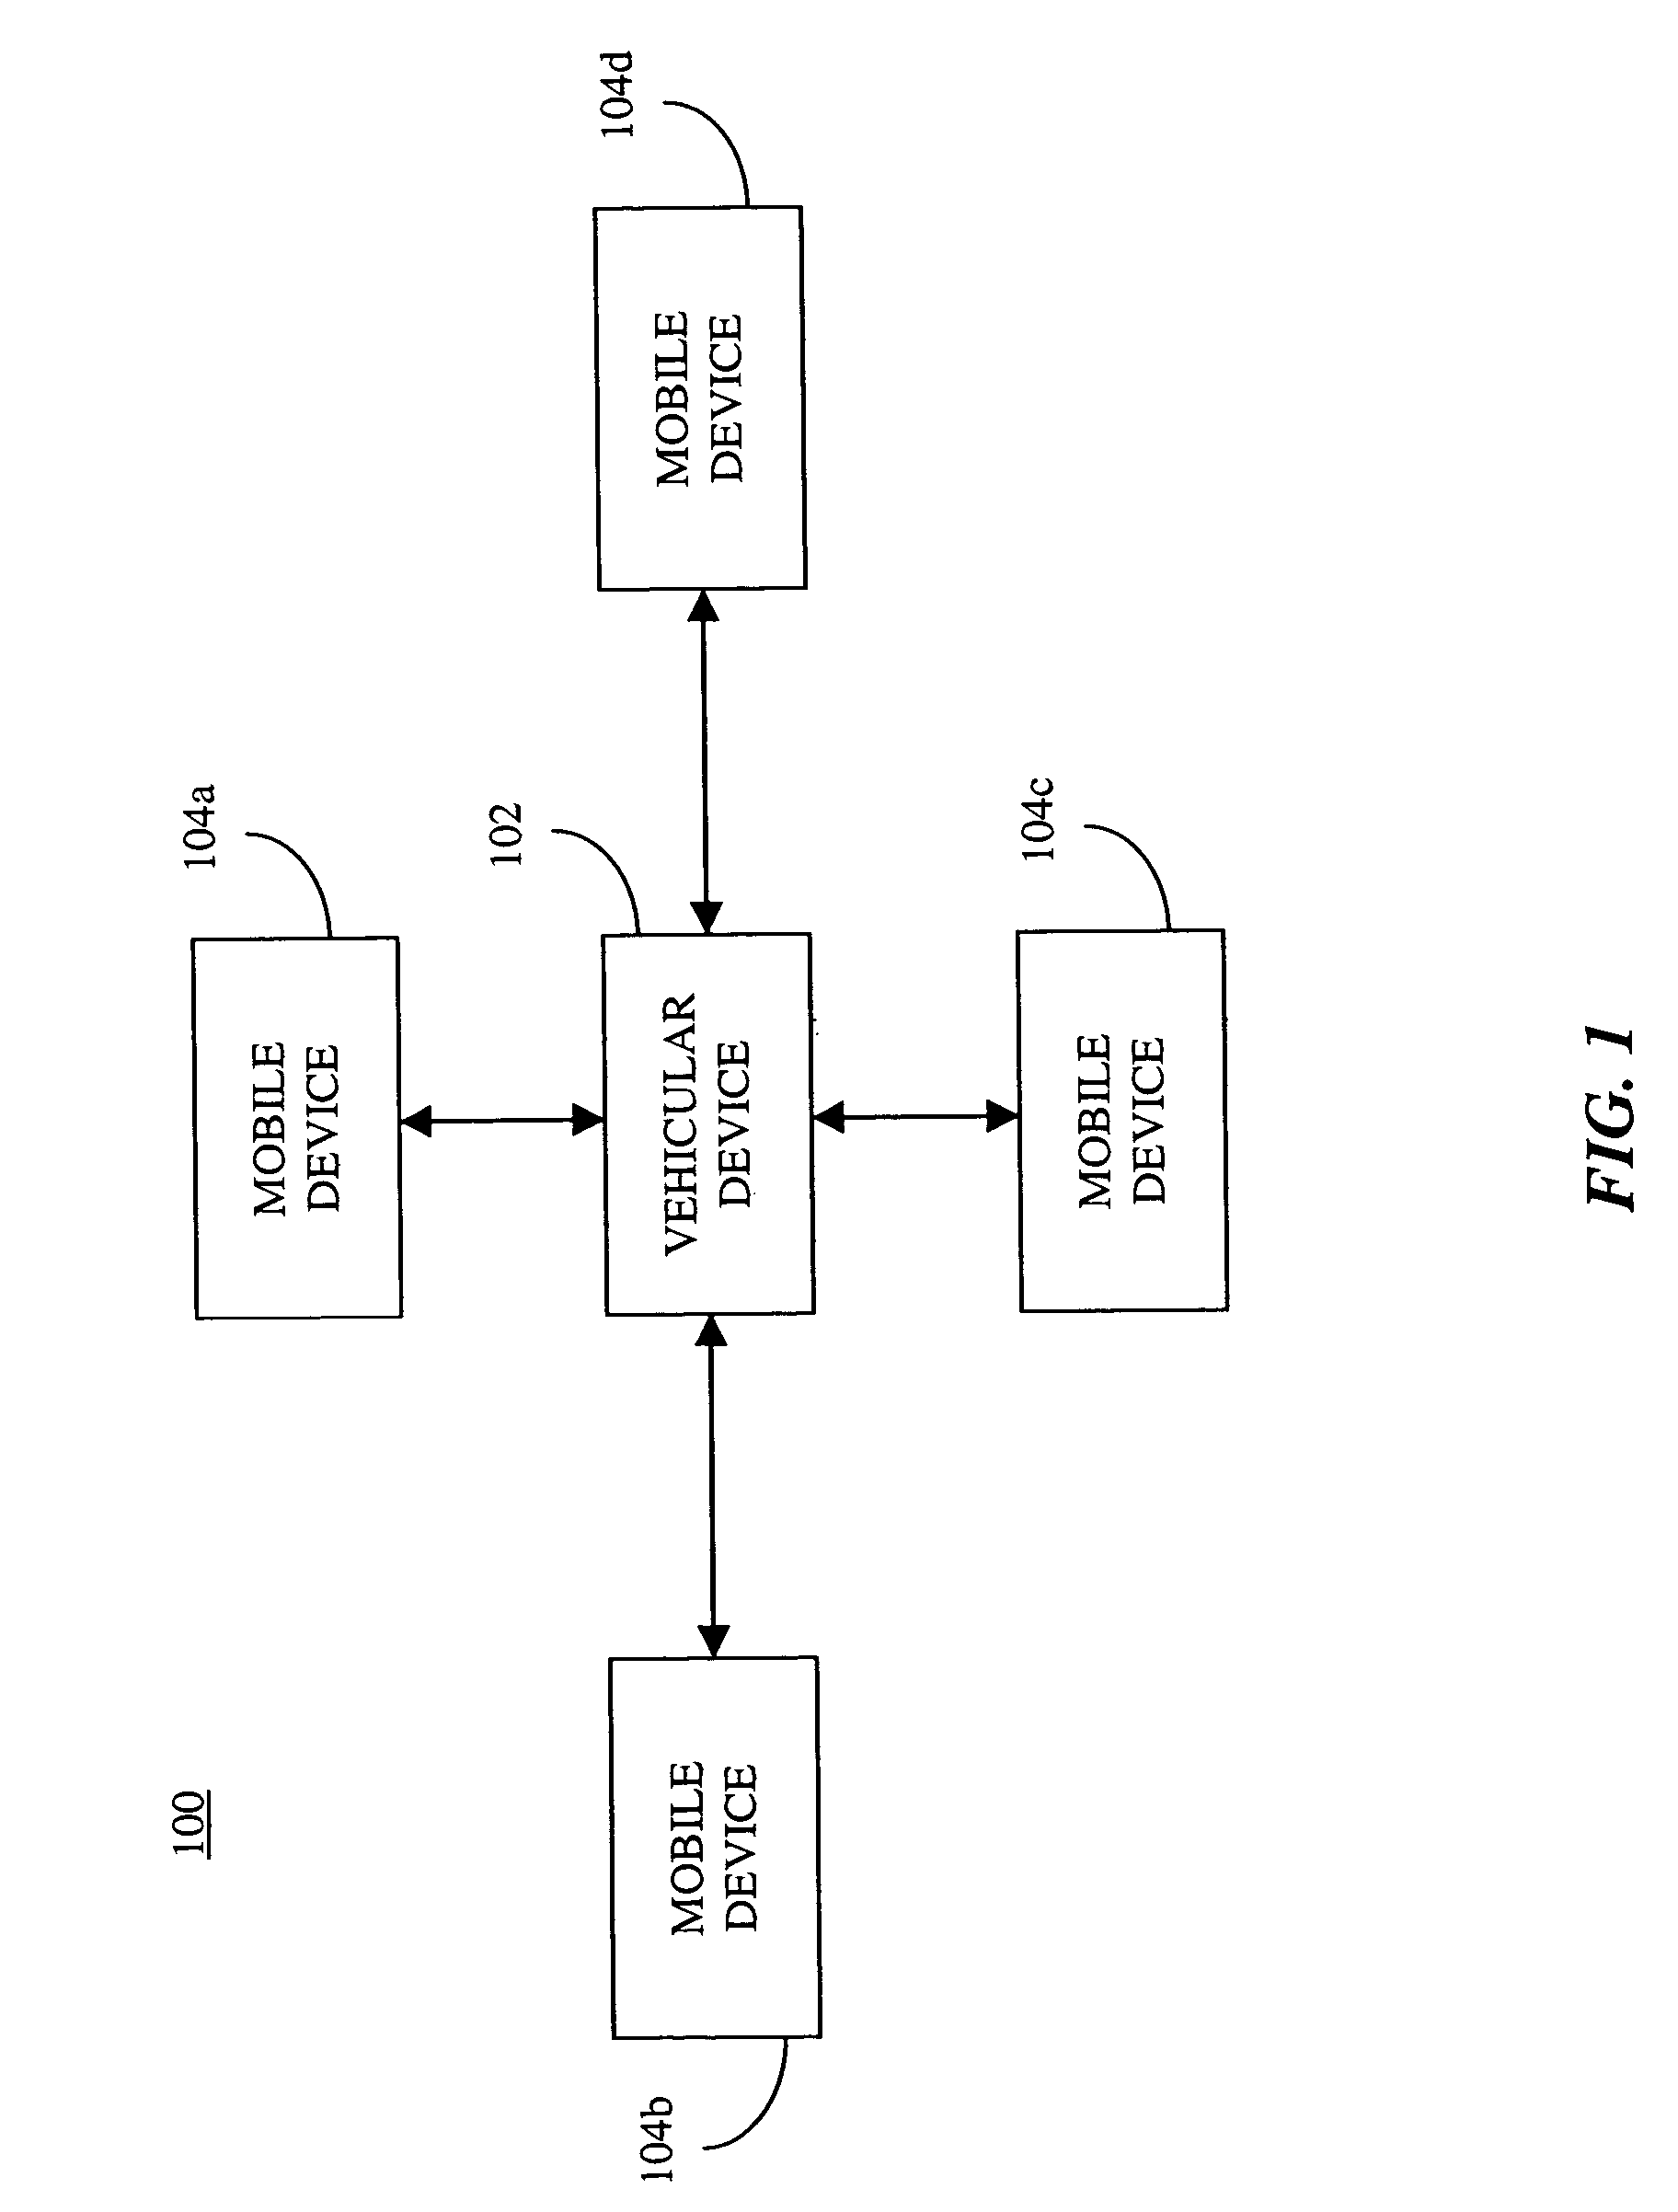 System and method for providing pedestrian alerts